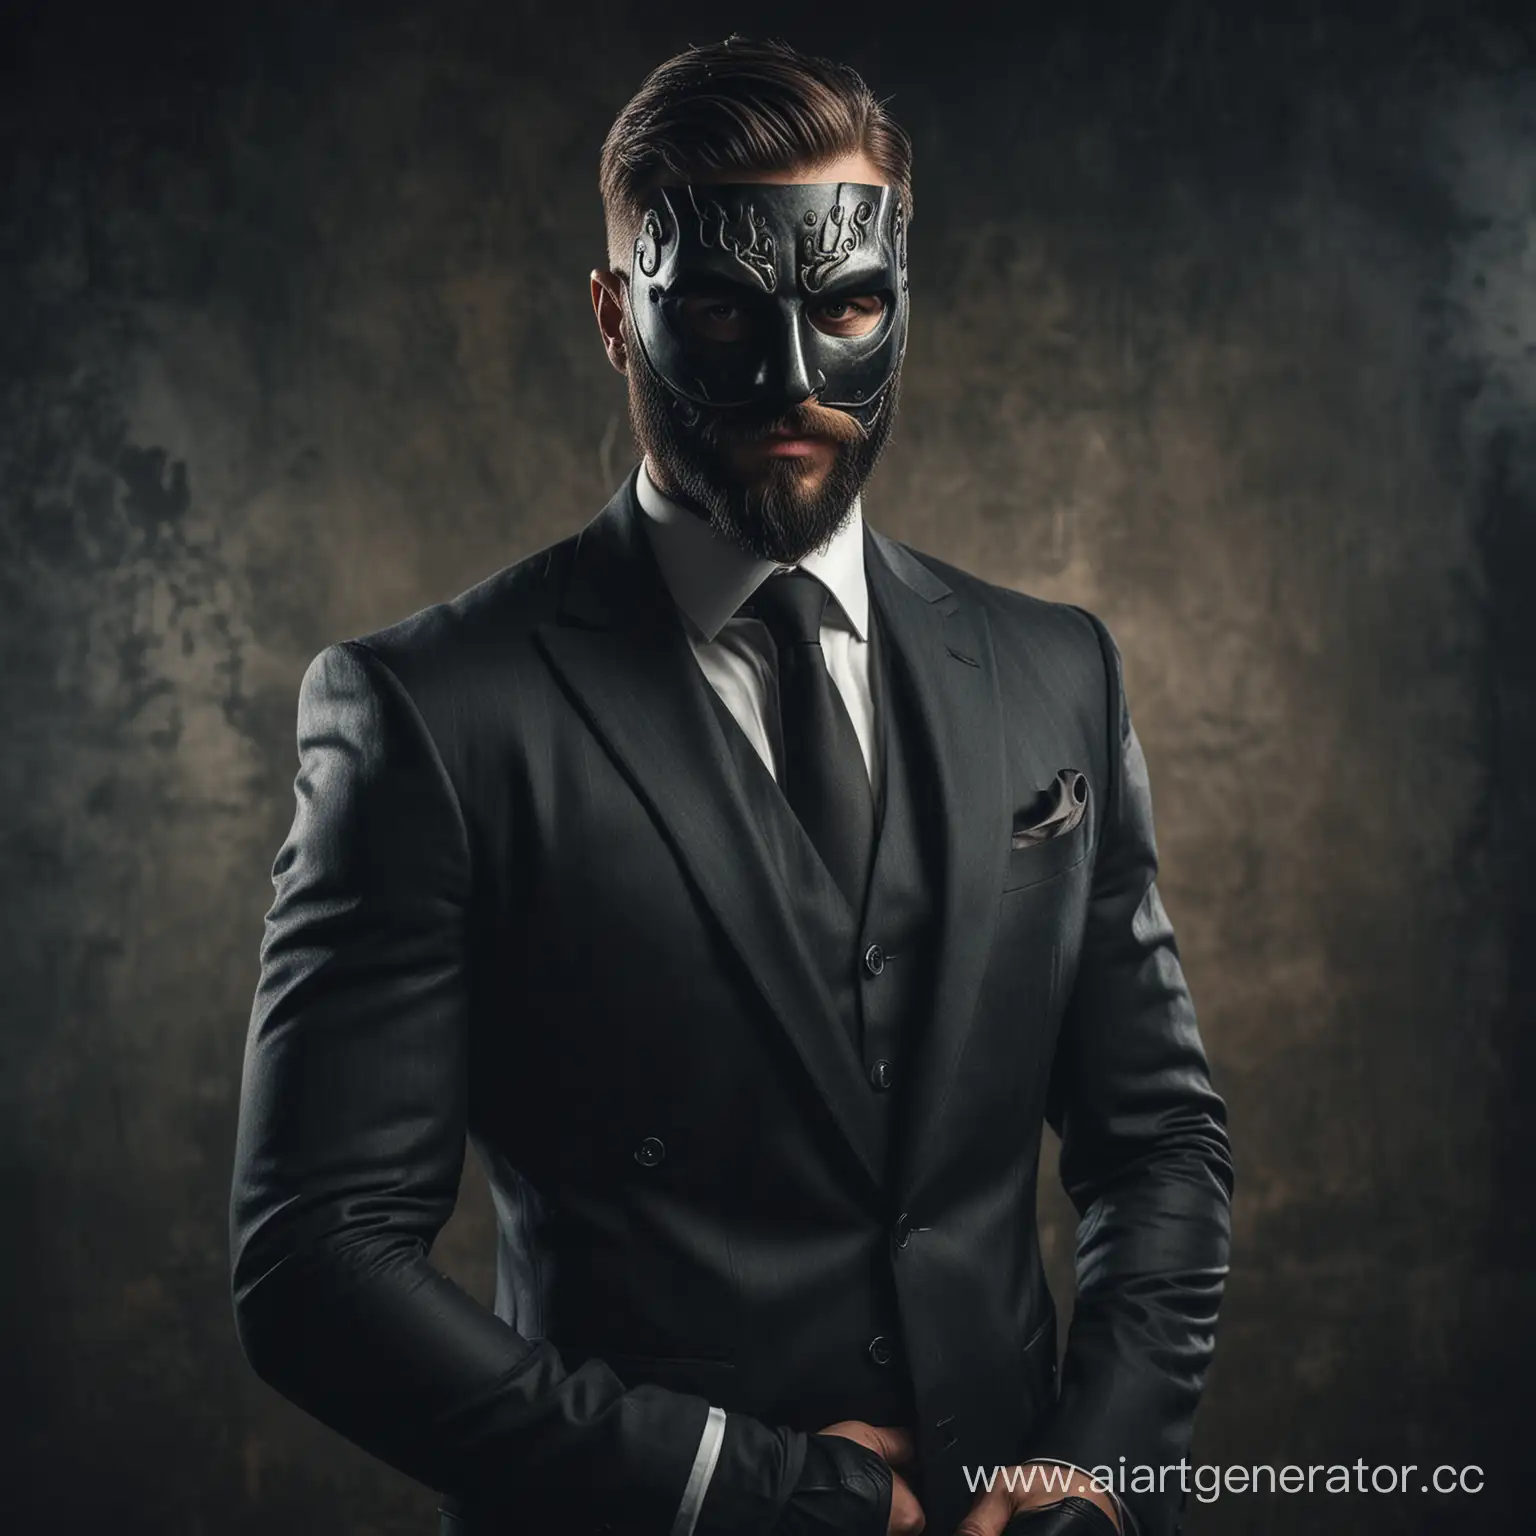 Mysterious-Man-in-Expensive-Suit-Wearing-Anonymous-Mask-in-Dark-Atmosphere